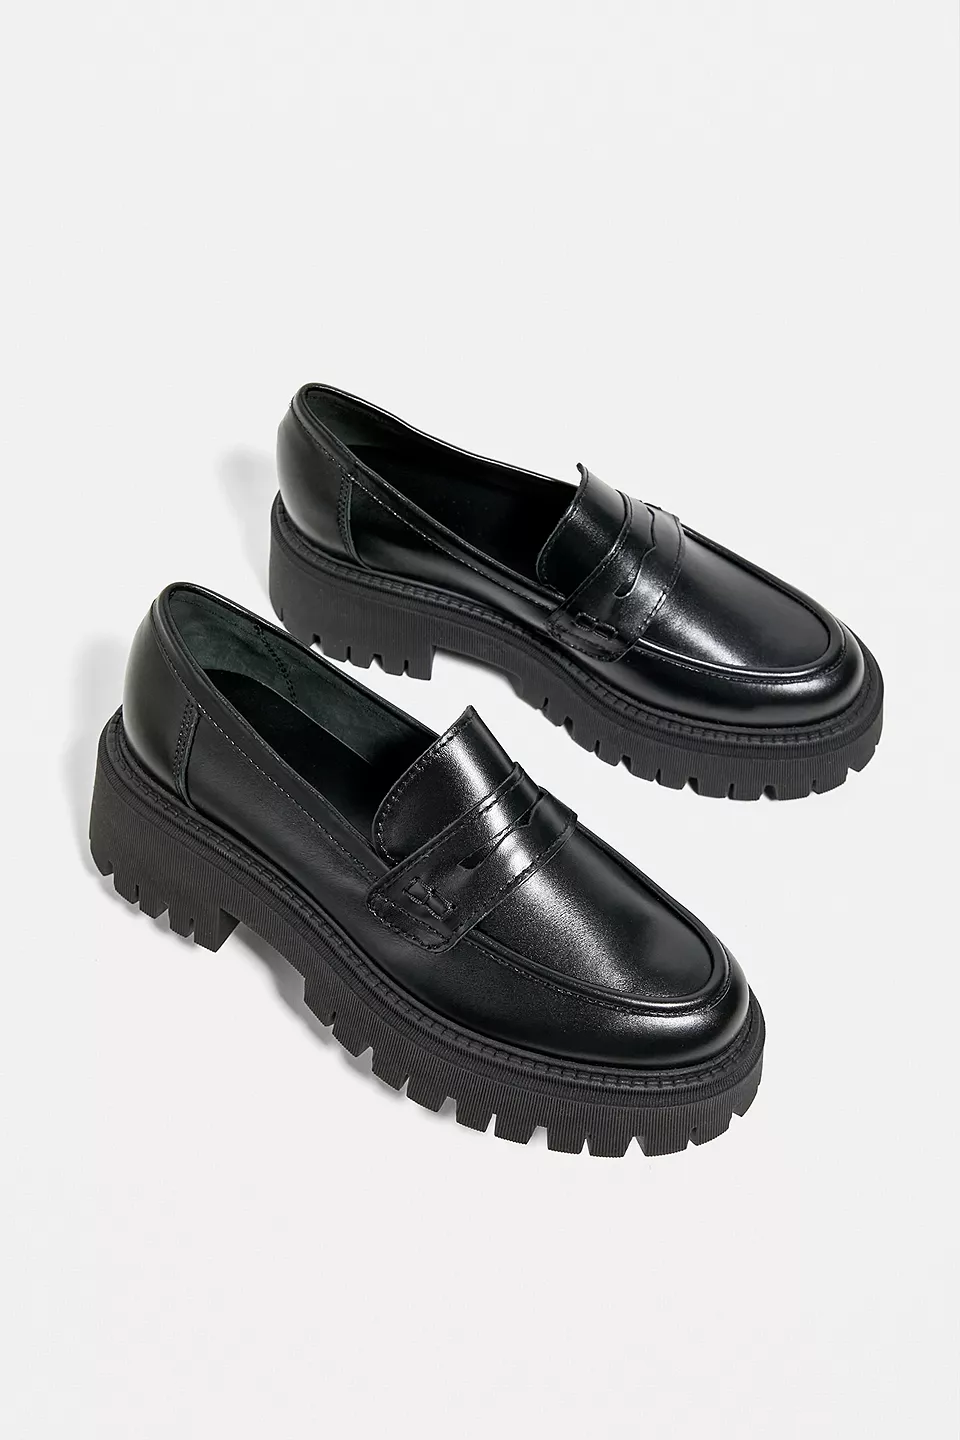 urbanoutfitters.com | UO Marcy Black Loafers